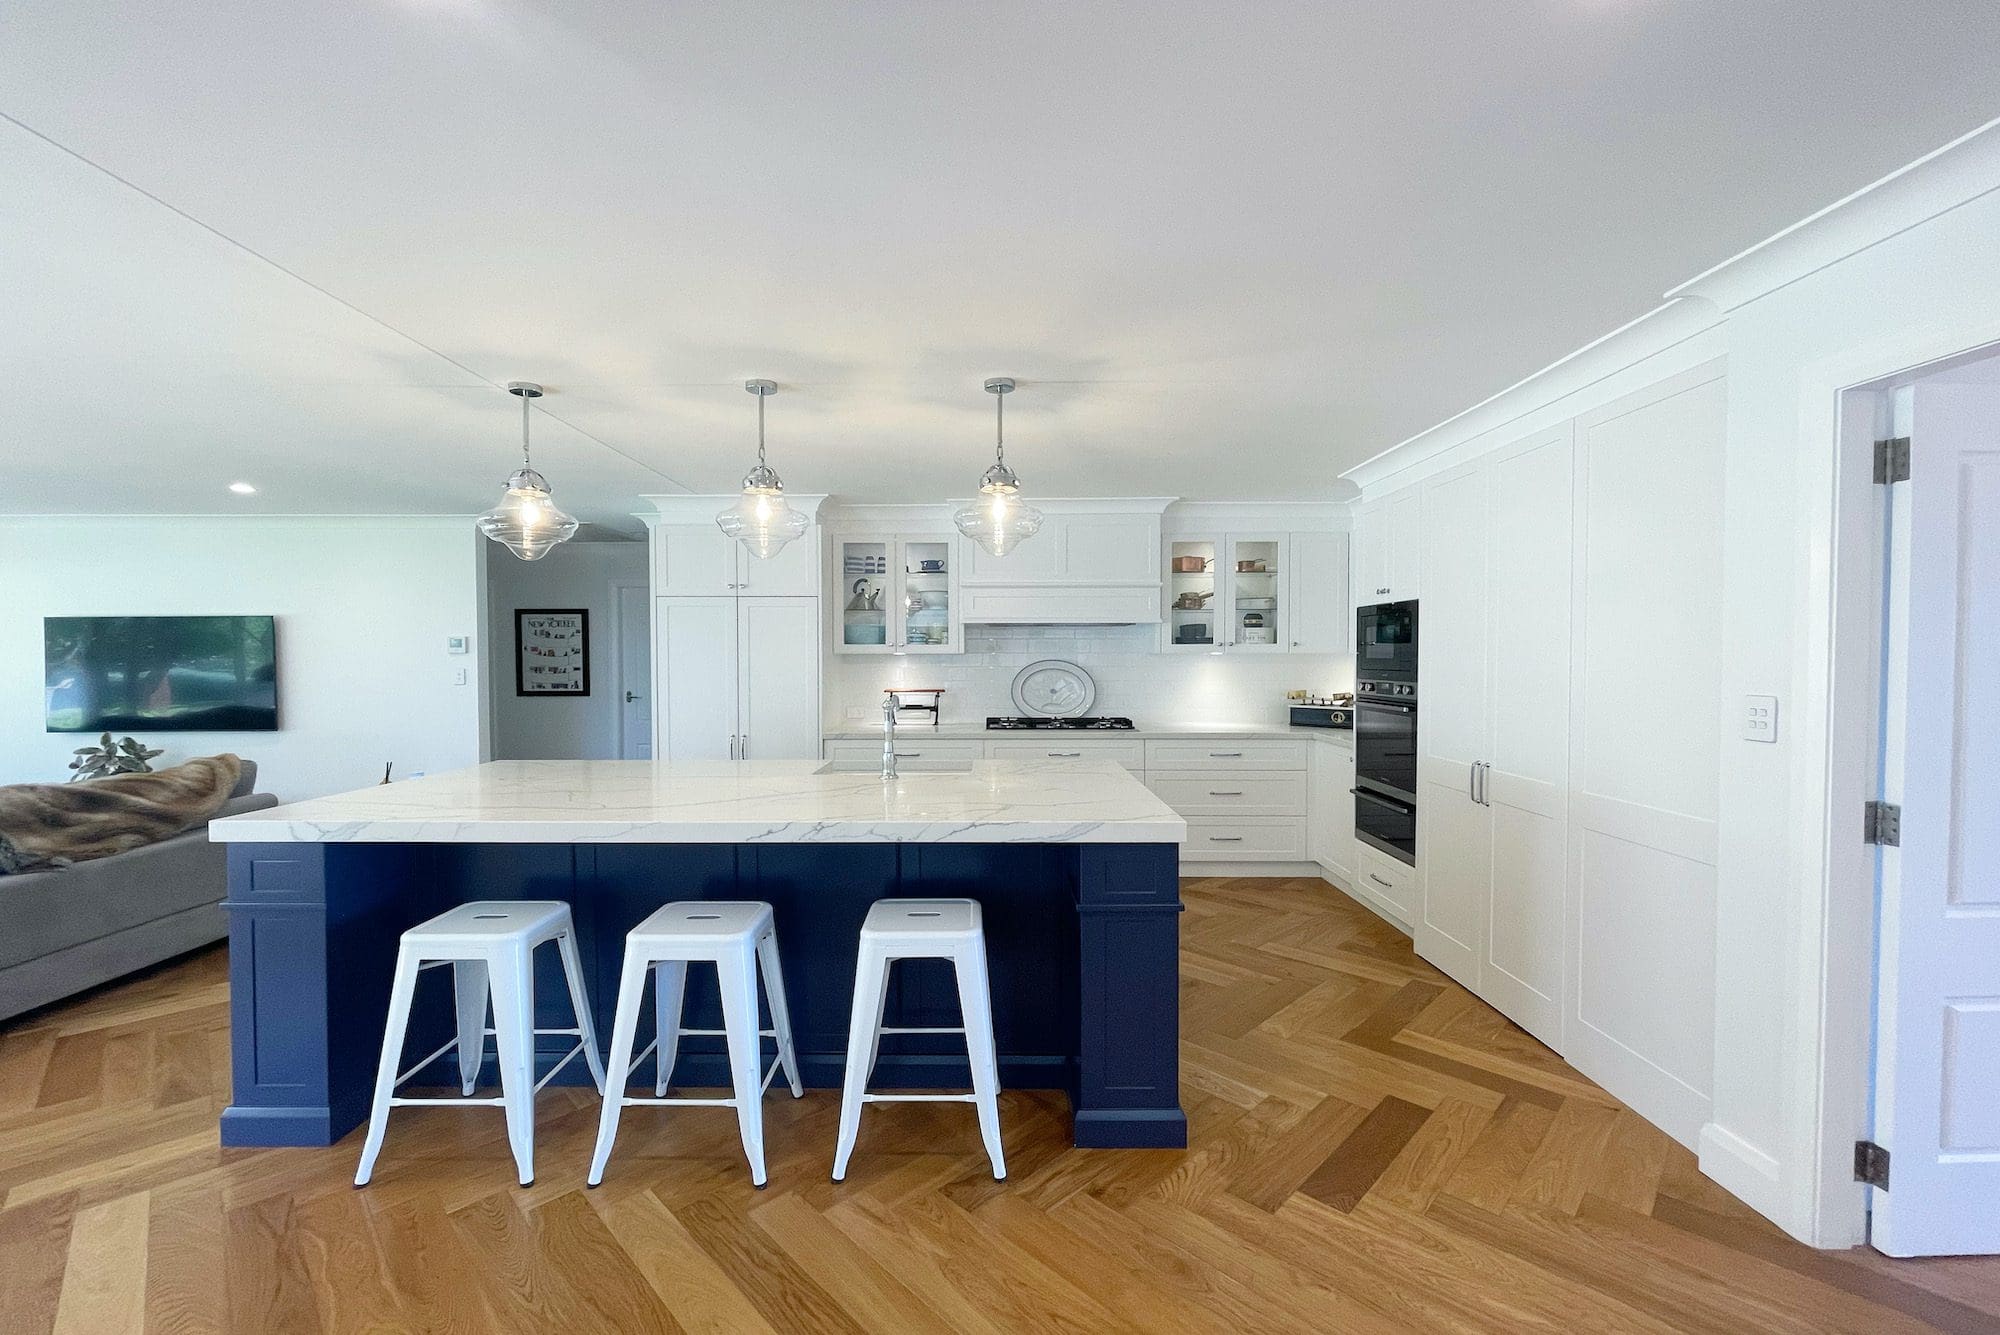 Timeless classic kitchen Moss vale with blue kitchen island